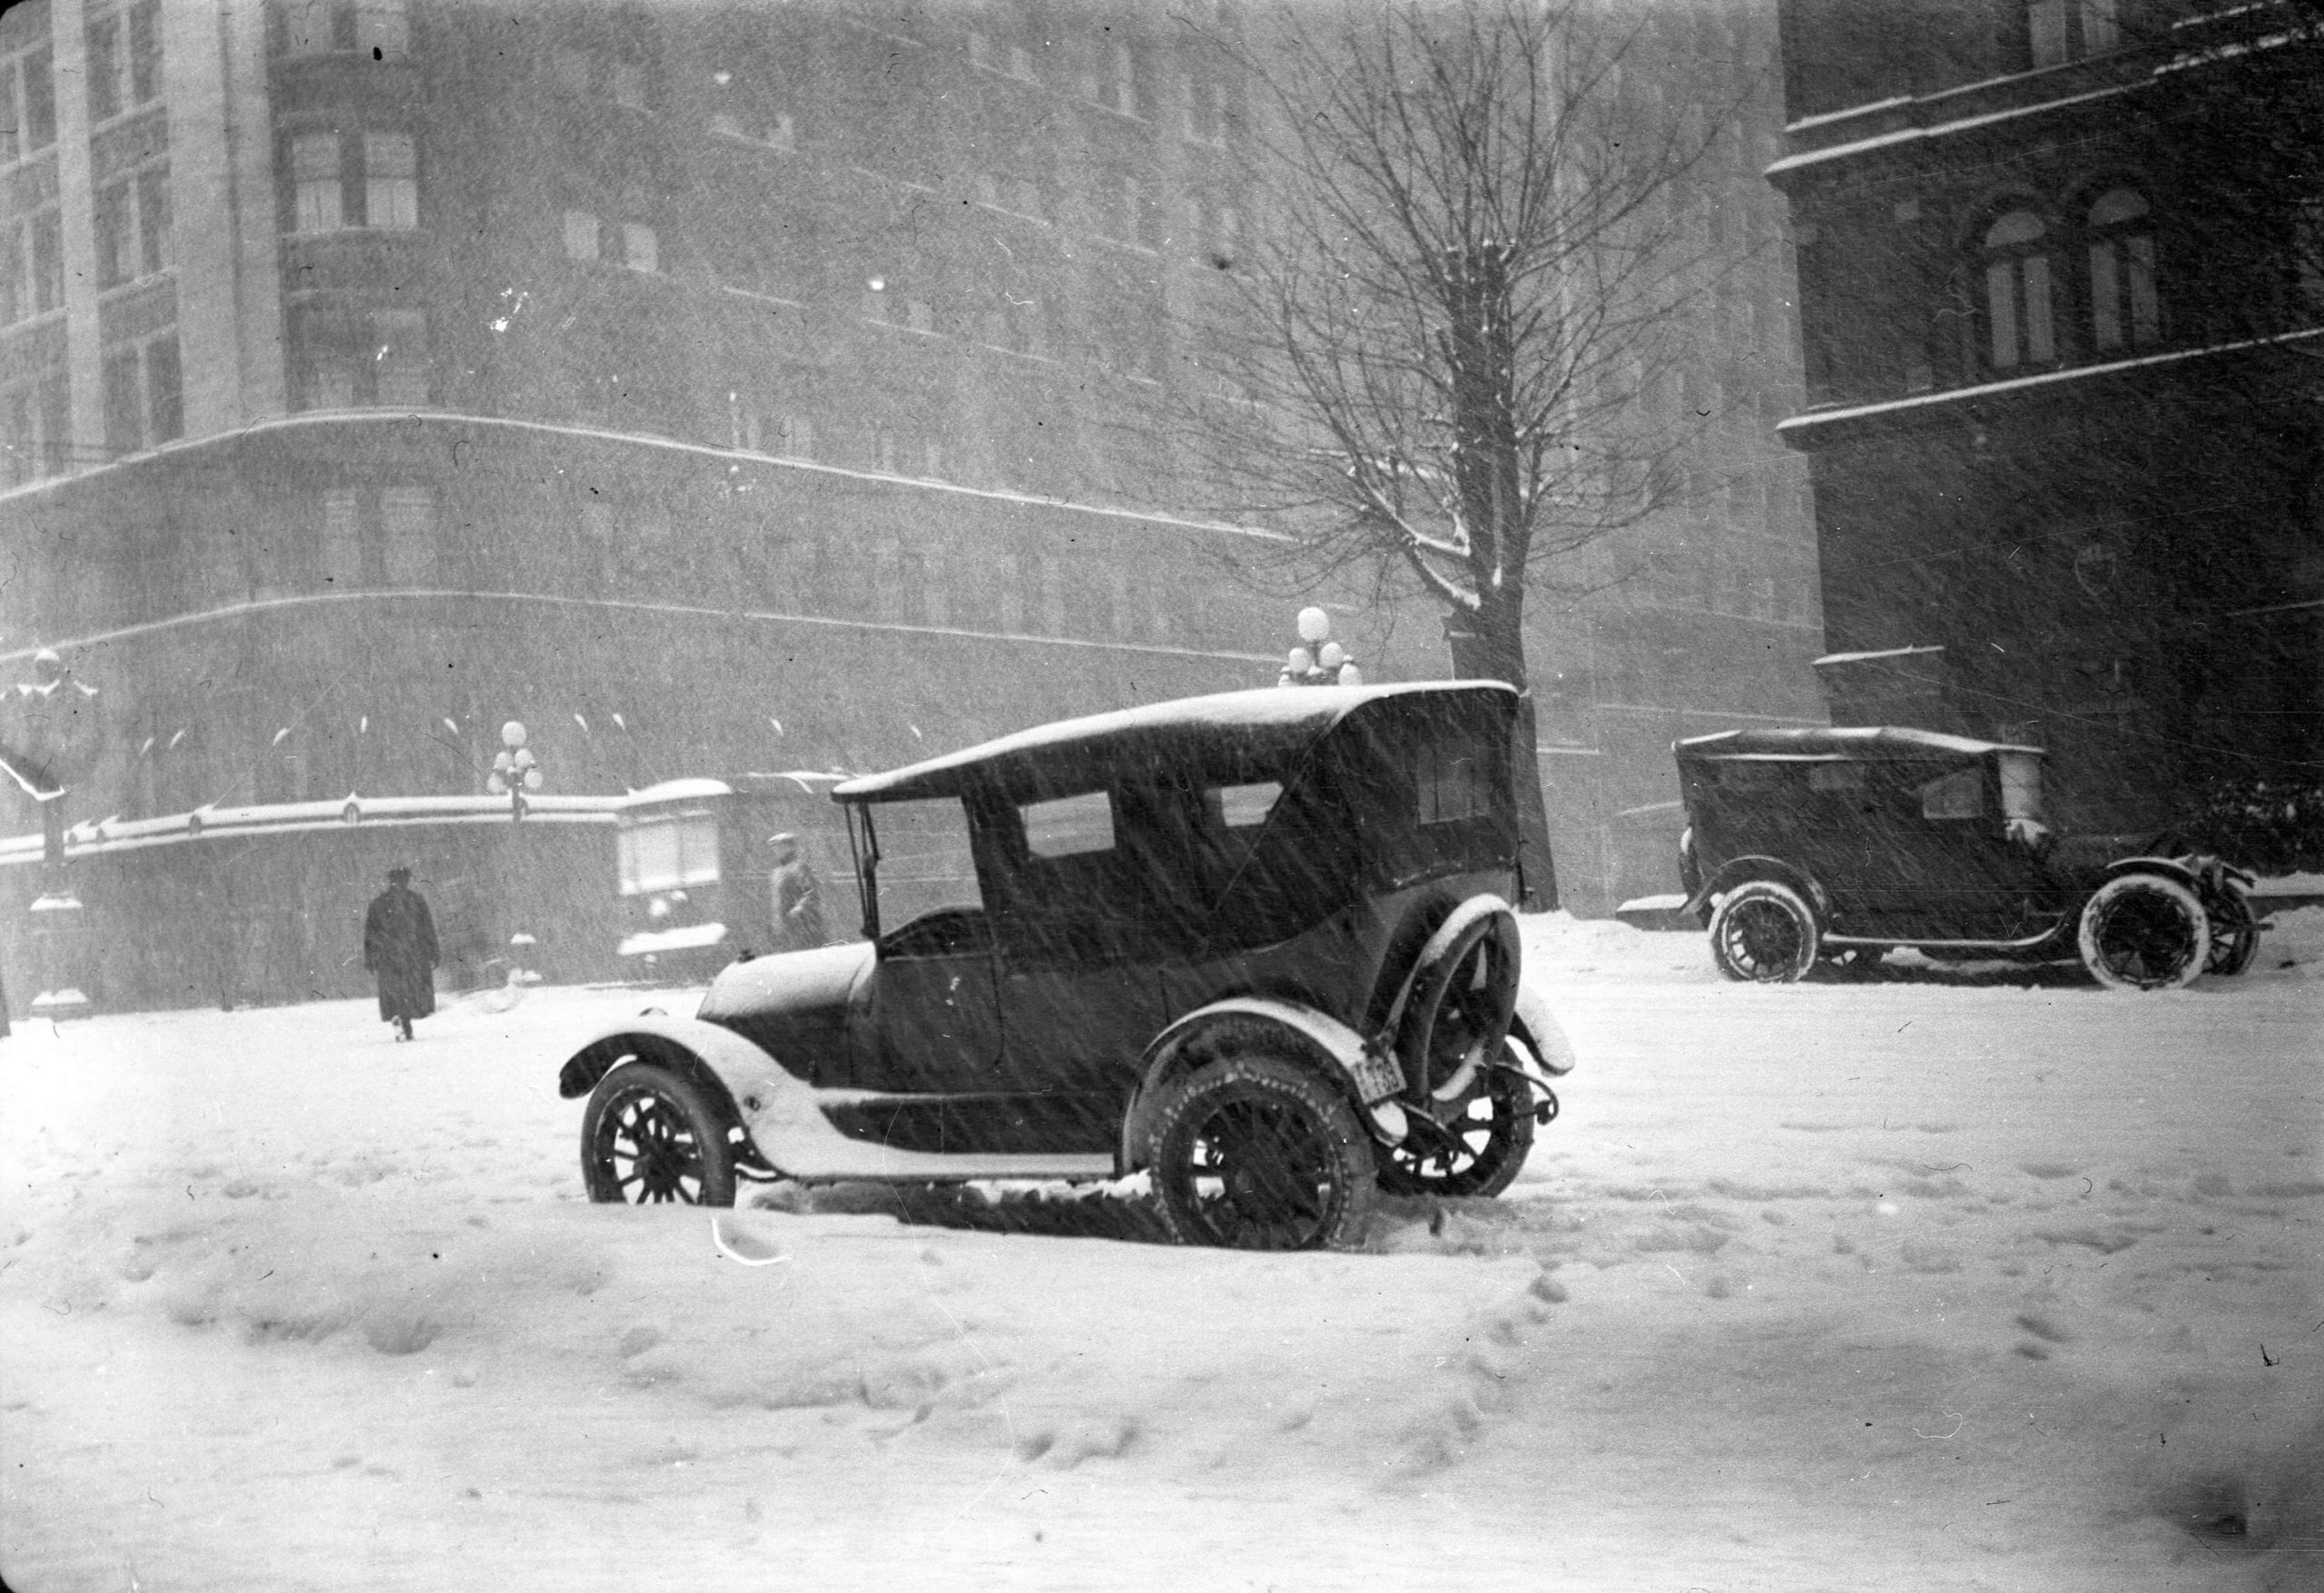 1926 - Georgia Street and Granville Street during snow storm